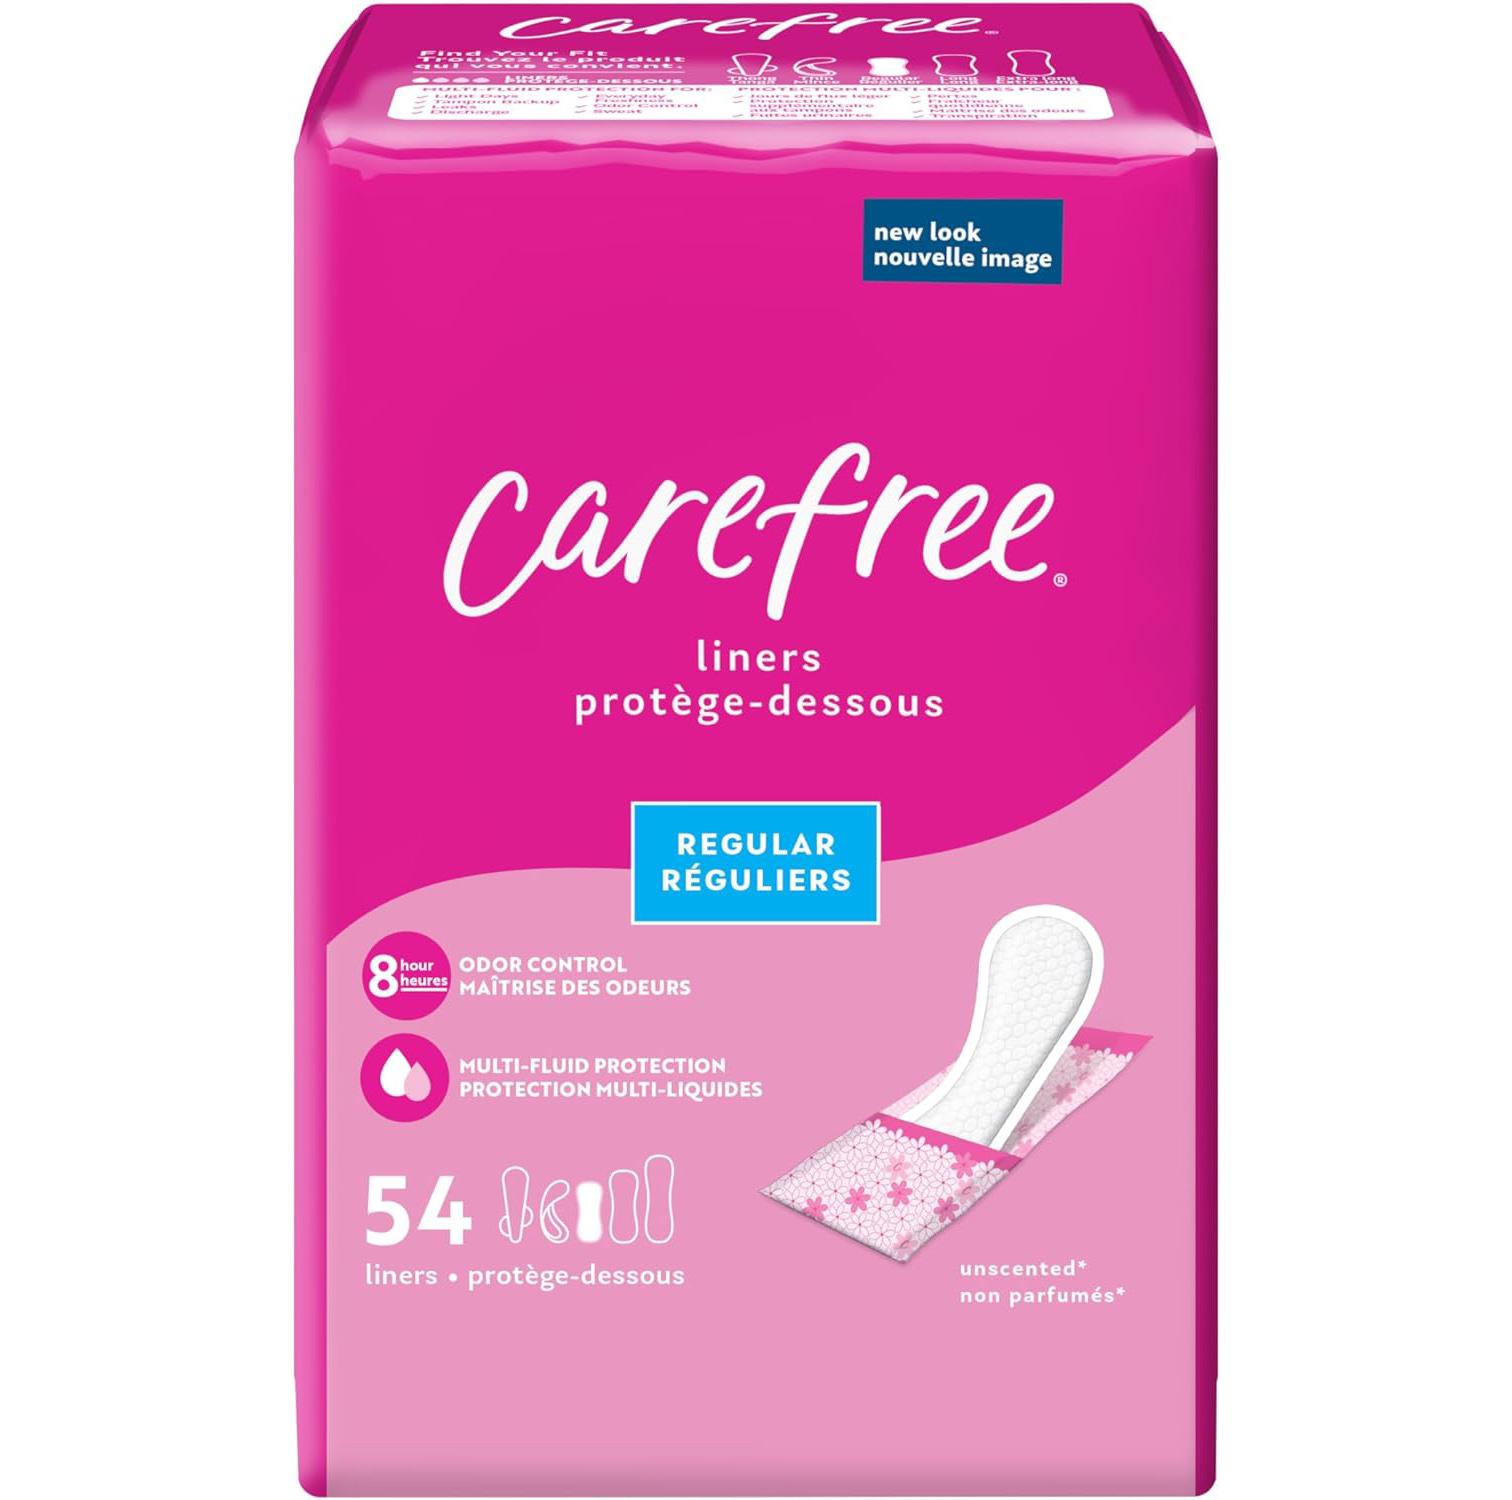 Carefree Panty Liners 54 Pack for $2.68